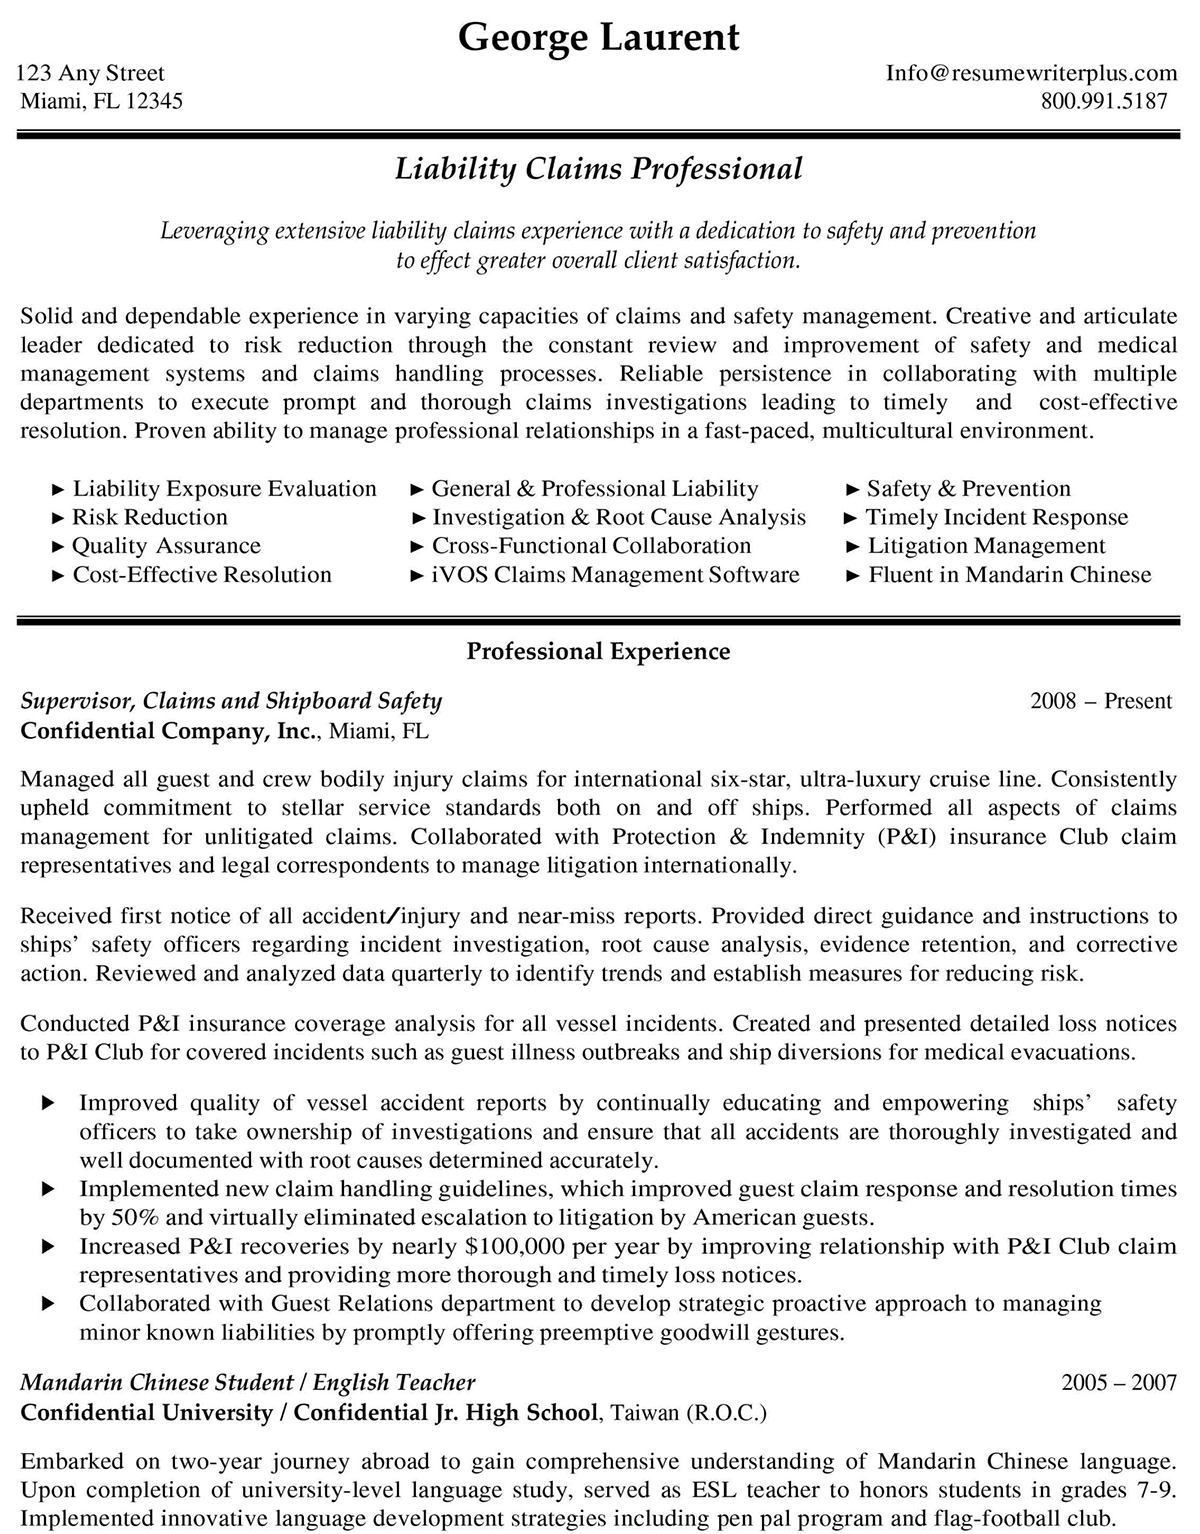 Claims-Liability-Professional-Resume-1